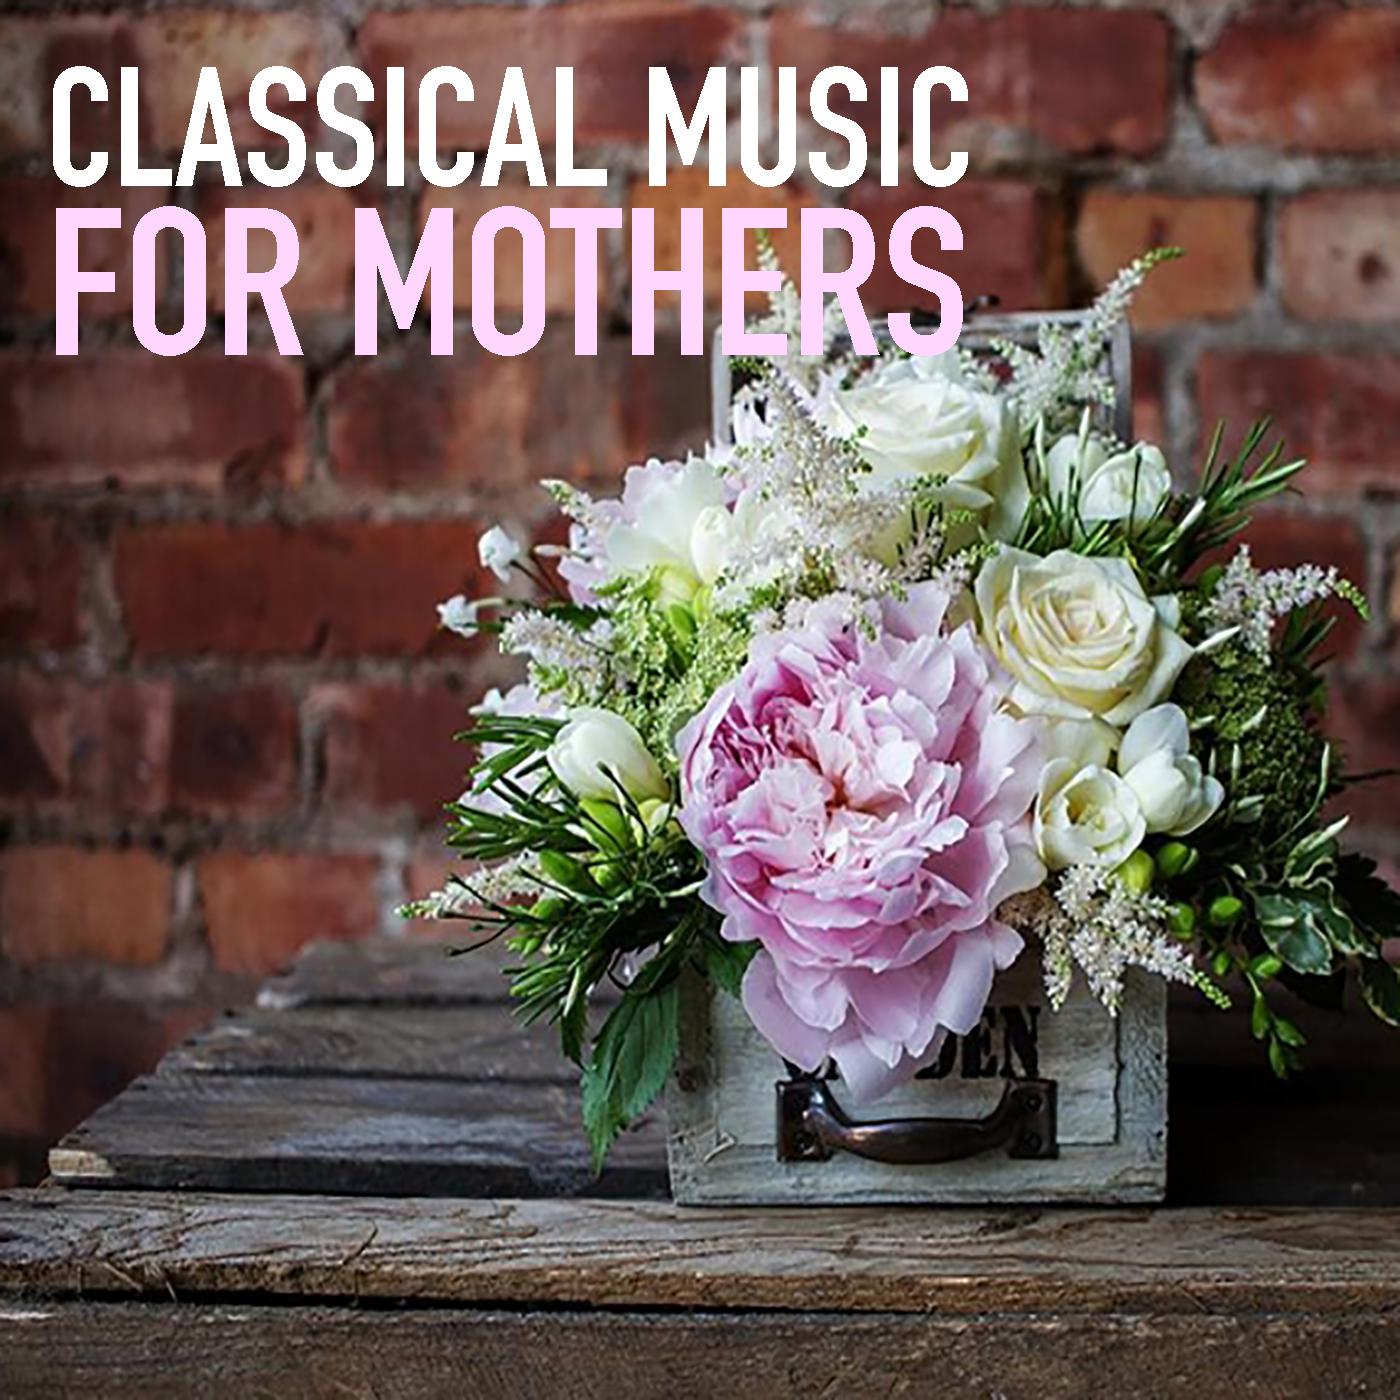 Classical Music For Mother's Day